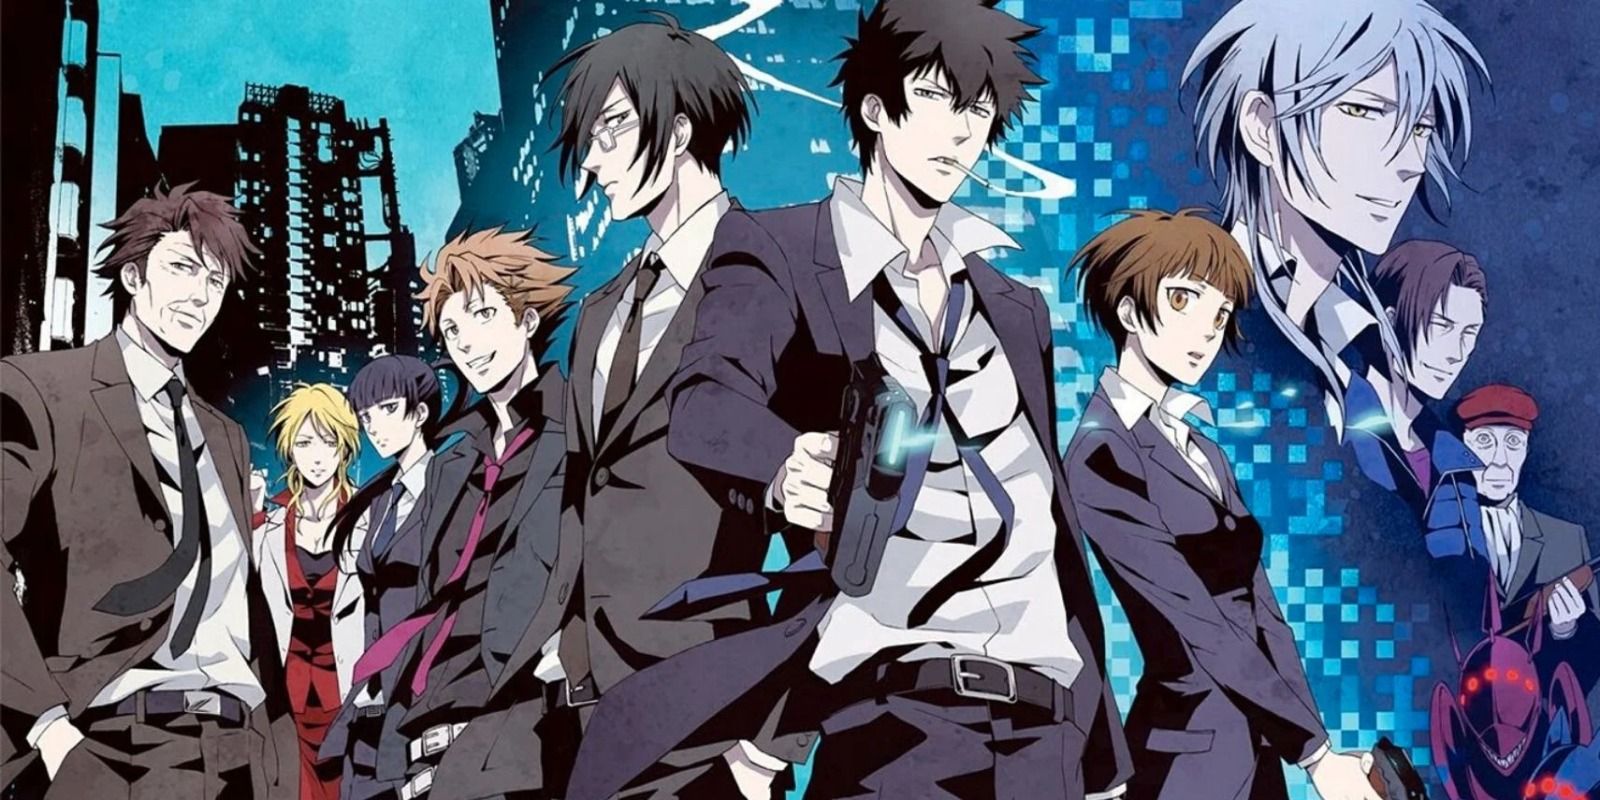 An image from Psycho-Pass.